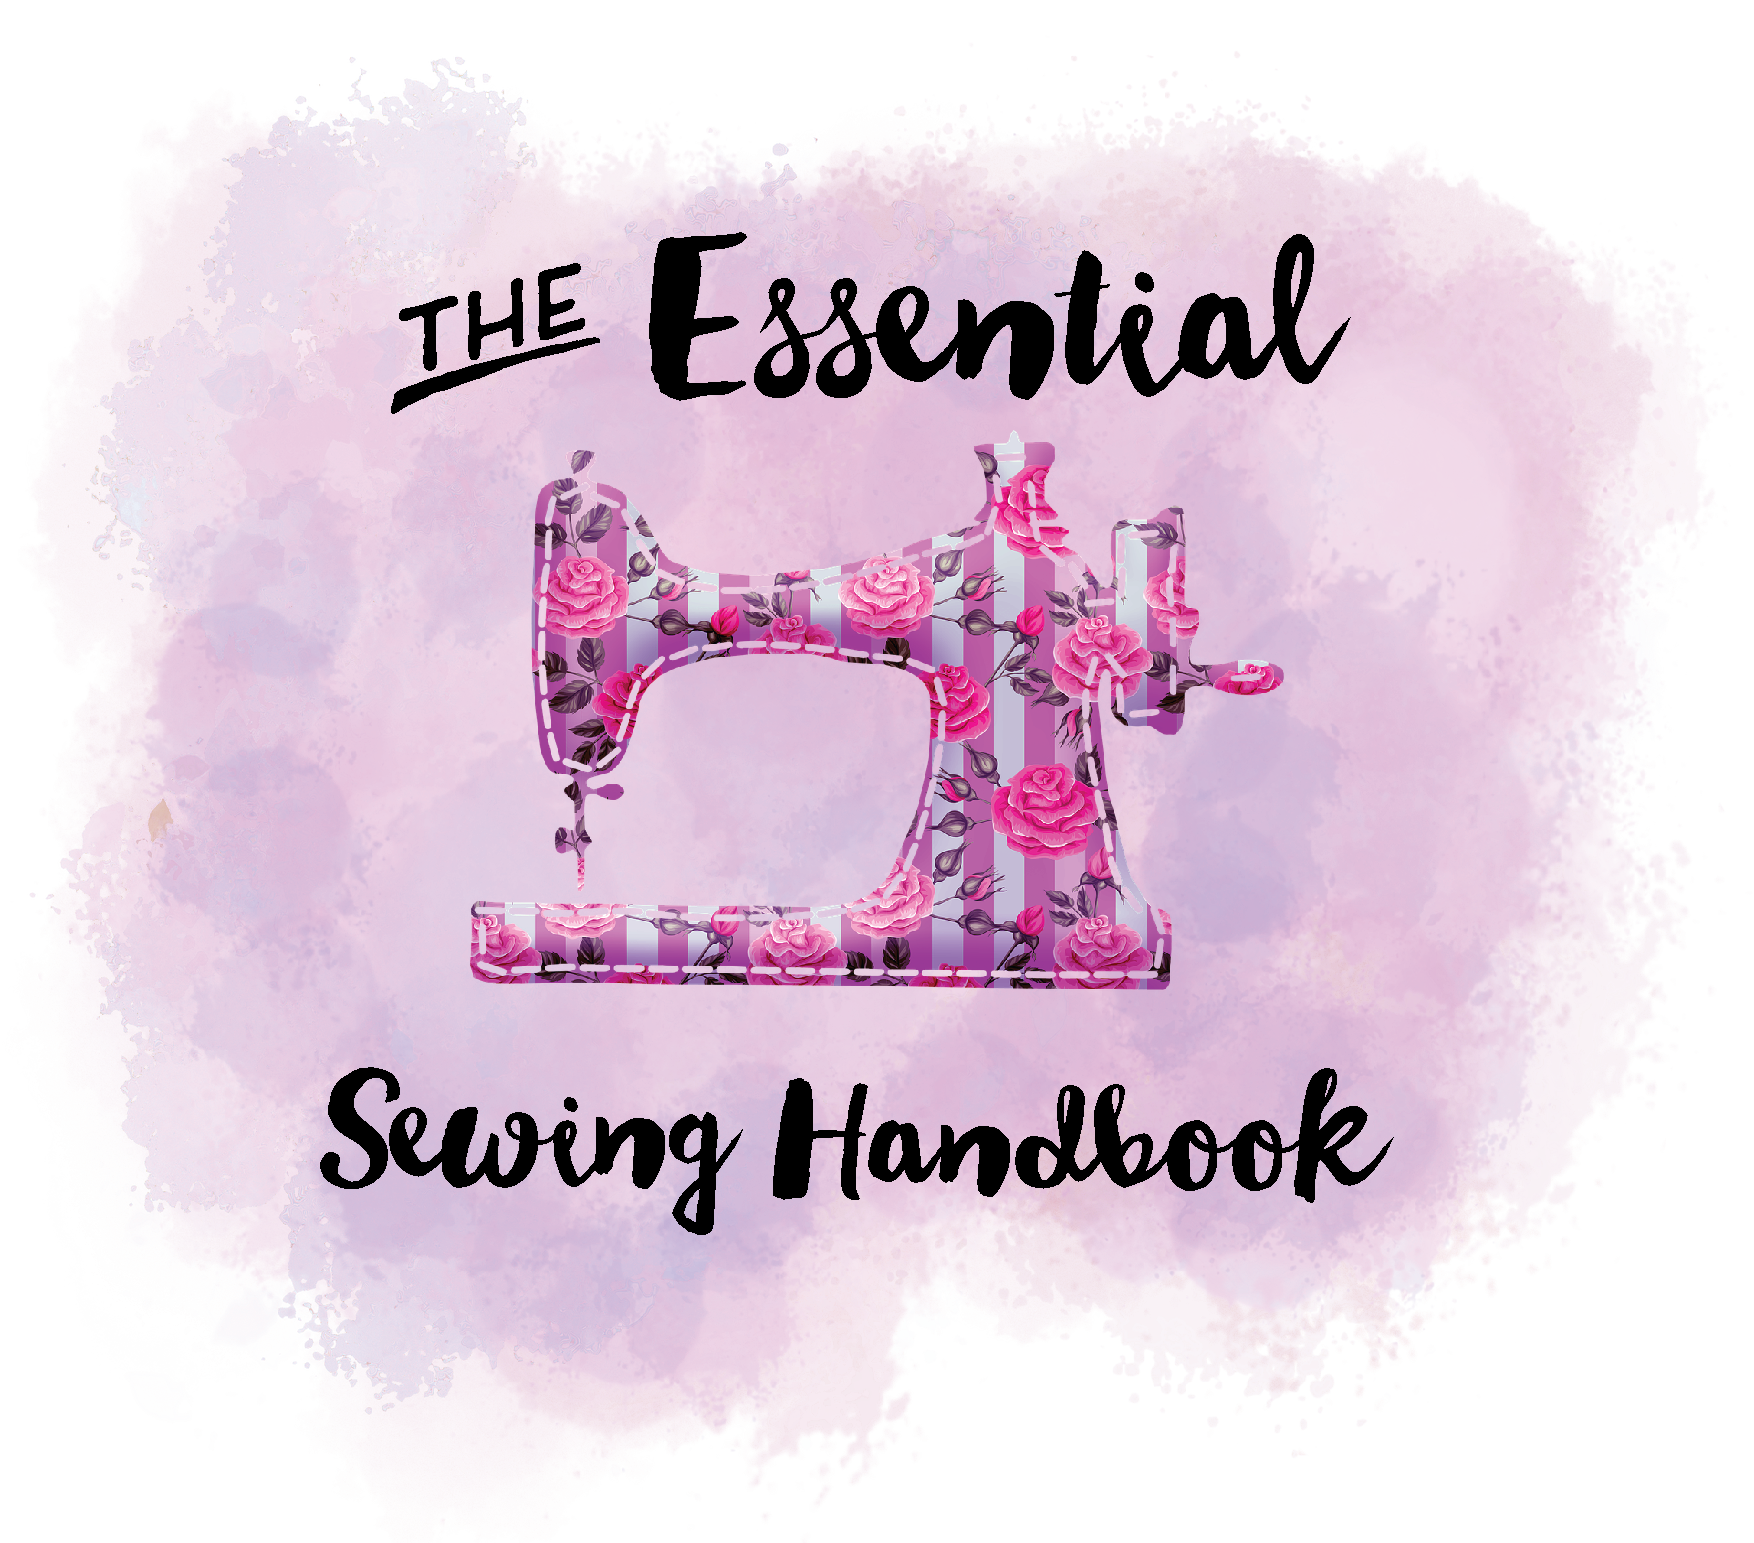 The Essential Guide to Sewing Pins - The Seasoned Homemaker®